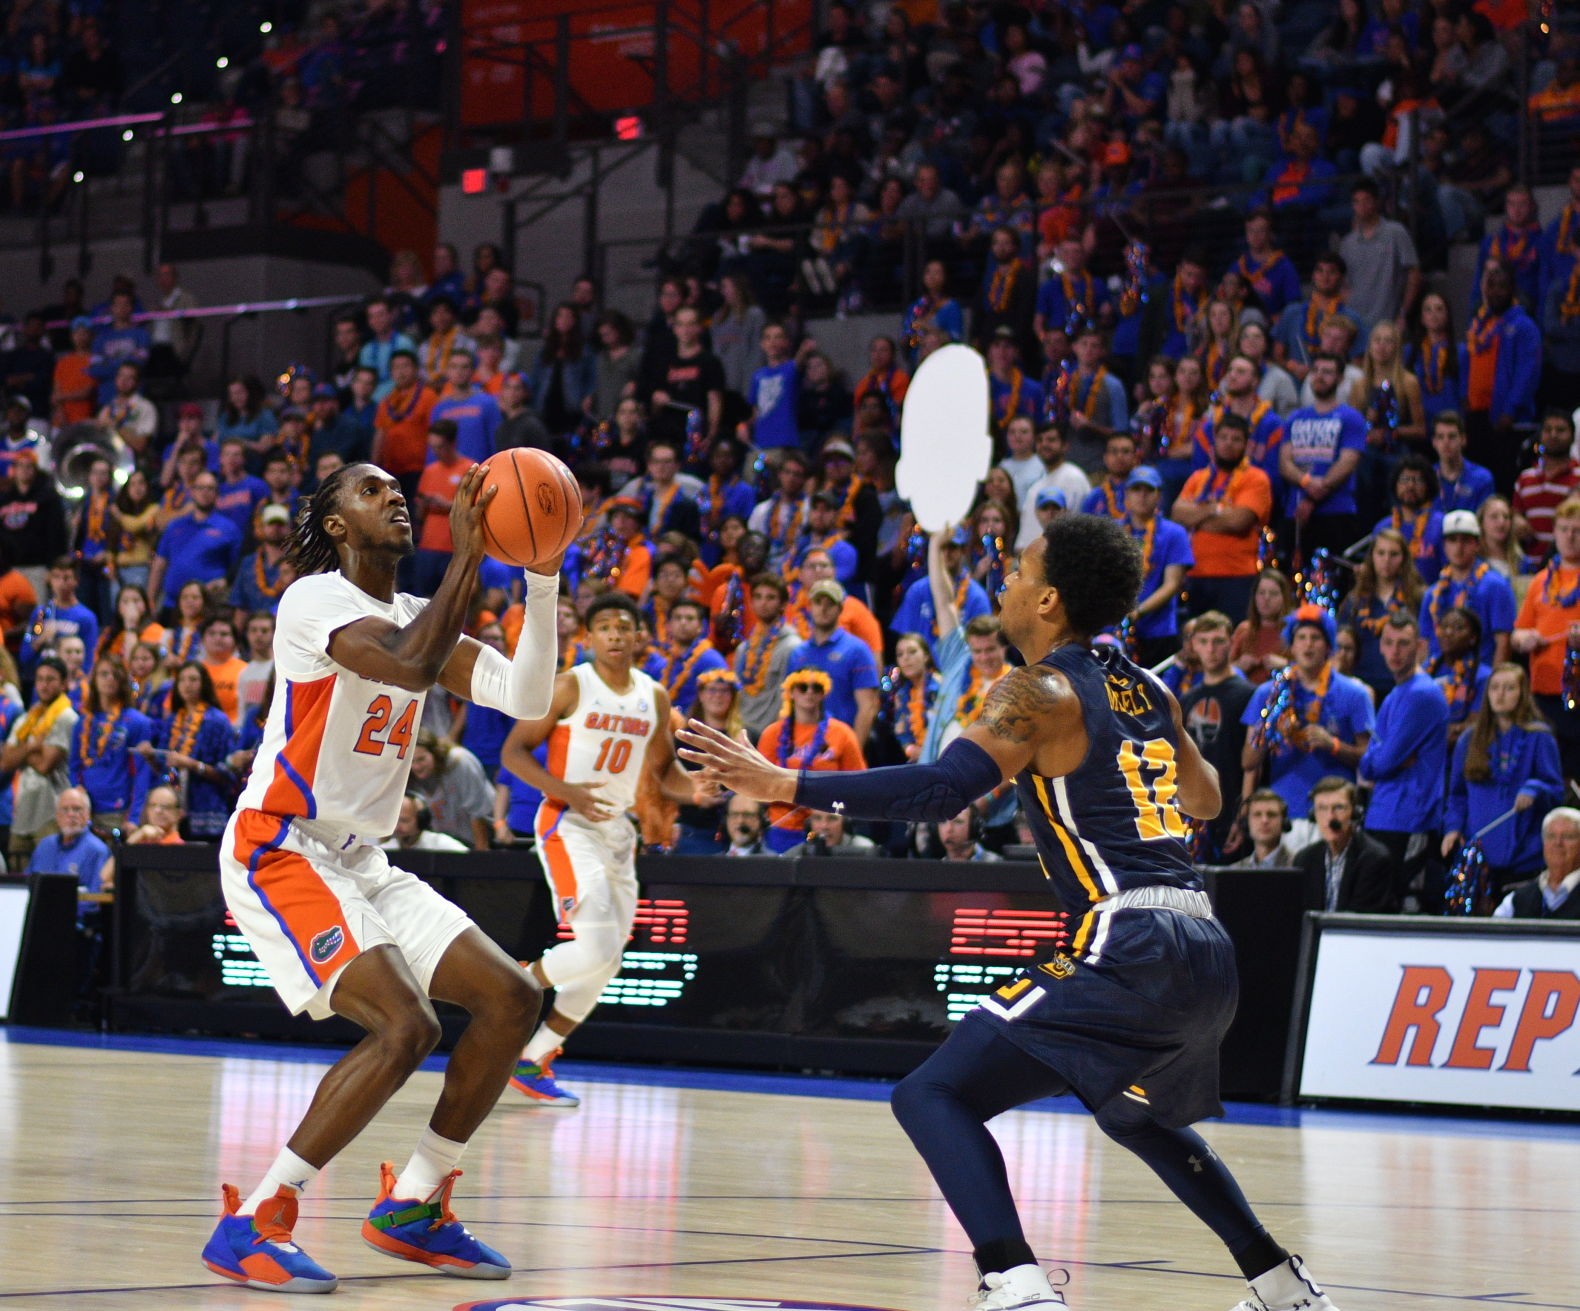 Playing ‘Fact or Fiction’ with UF basketball